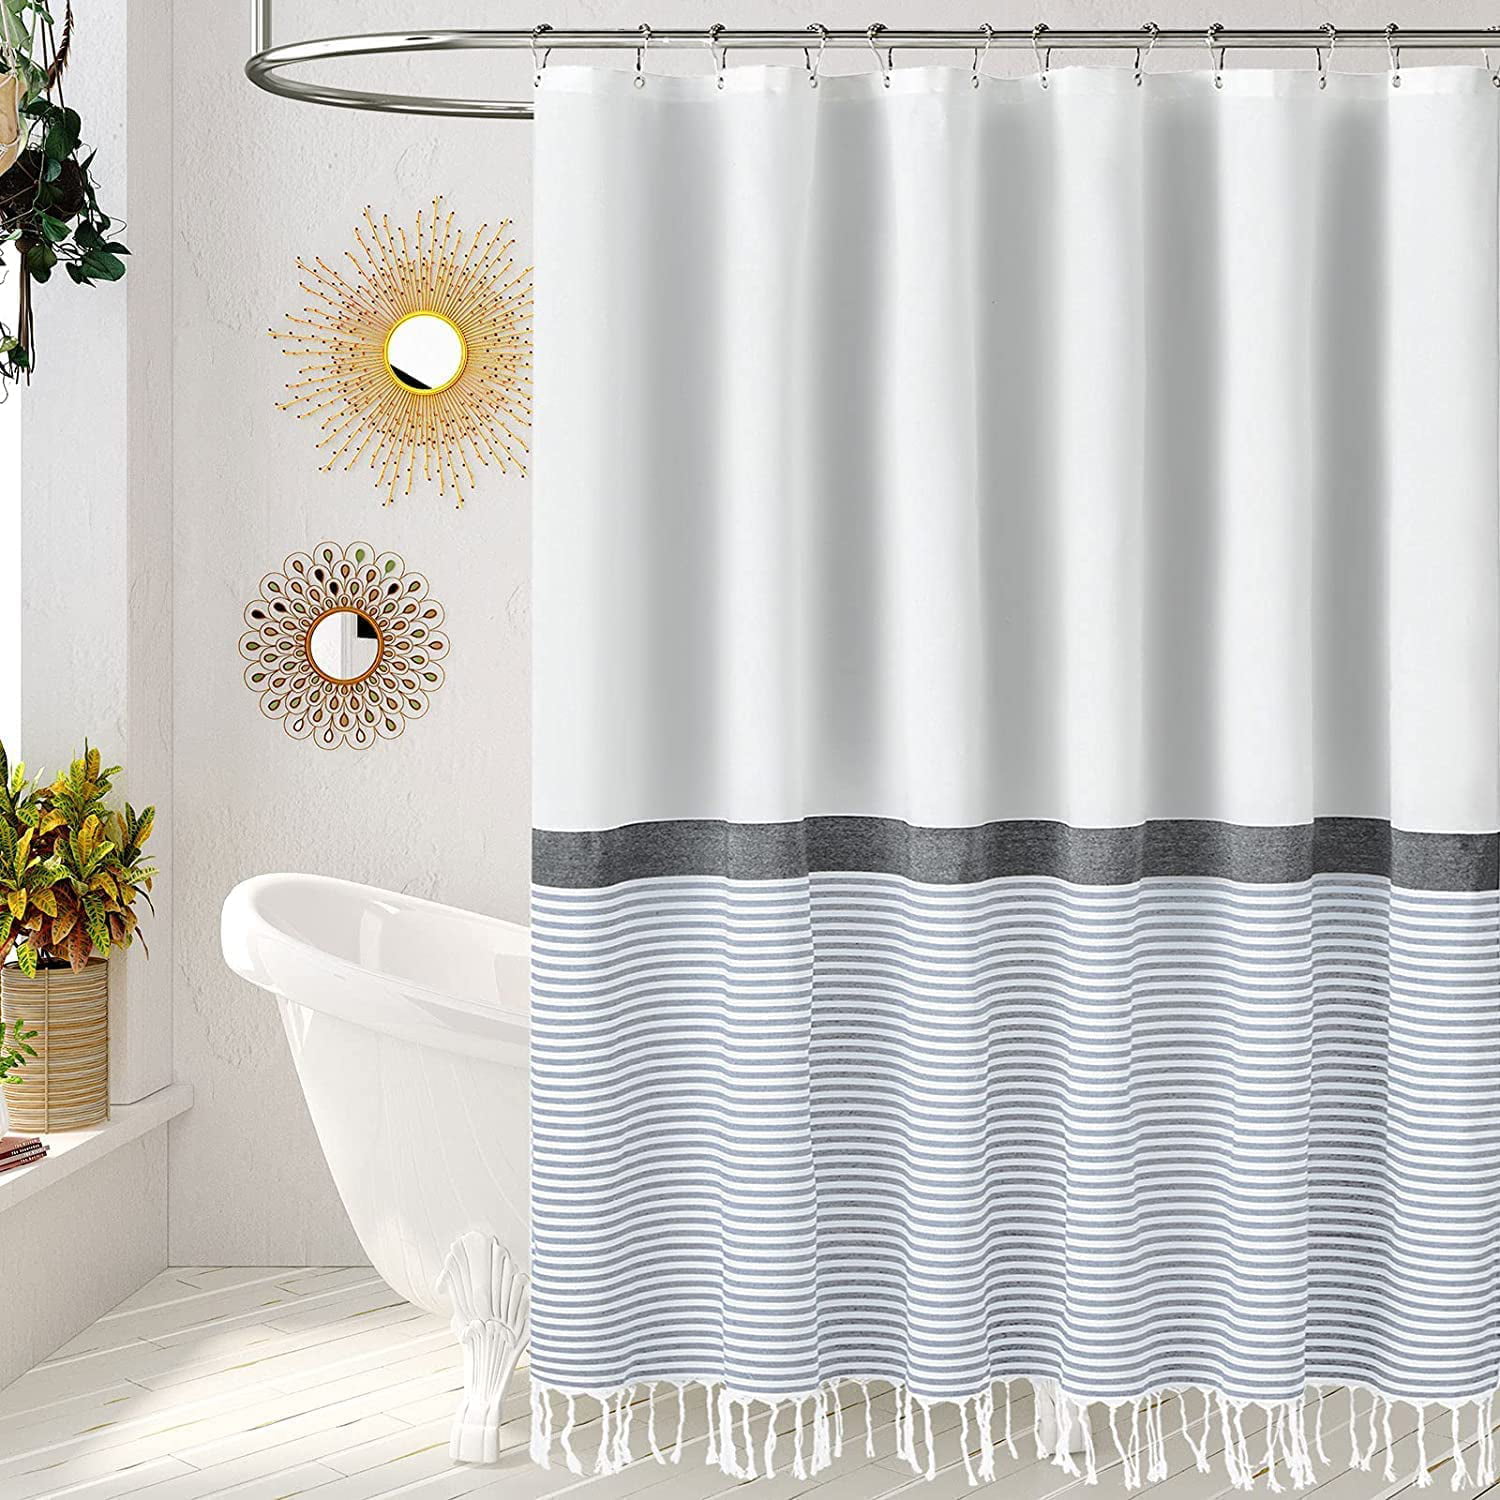 JOYWEIBlue Striped Shower Curtain Cotton Fabric Shower Curtain with Tassels  for Bathroom Decor,12 Shower Curtain Hooks Included,72